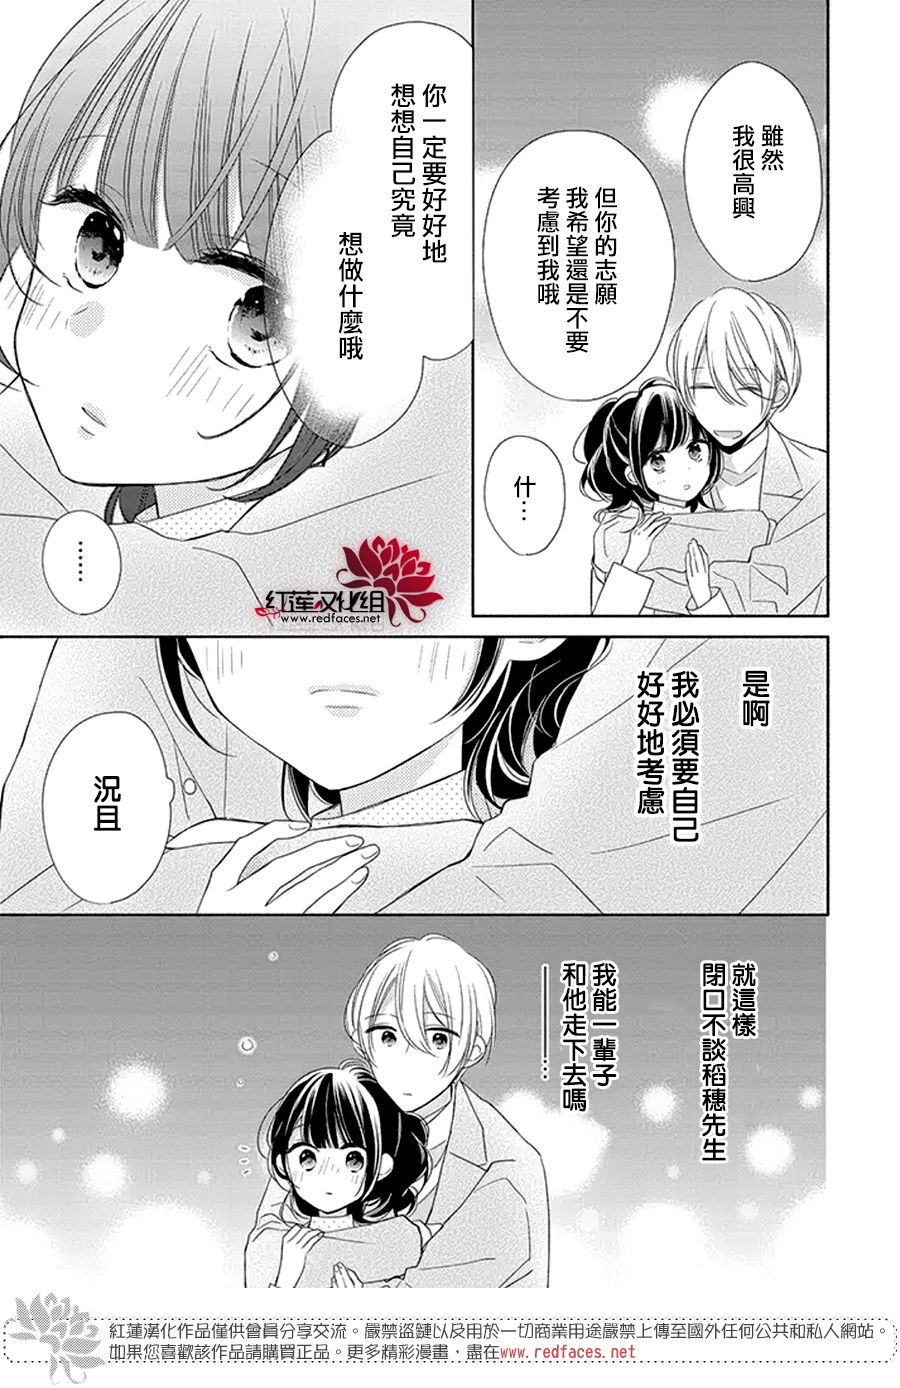 If given a second chance - 25話 - 1